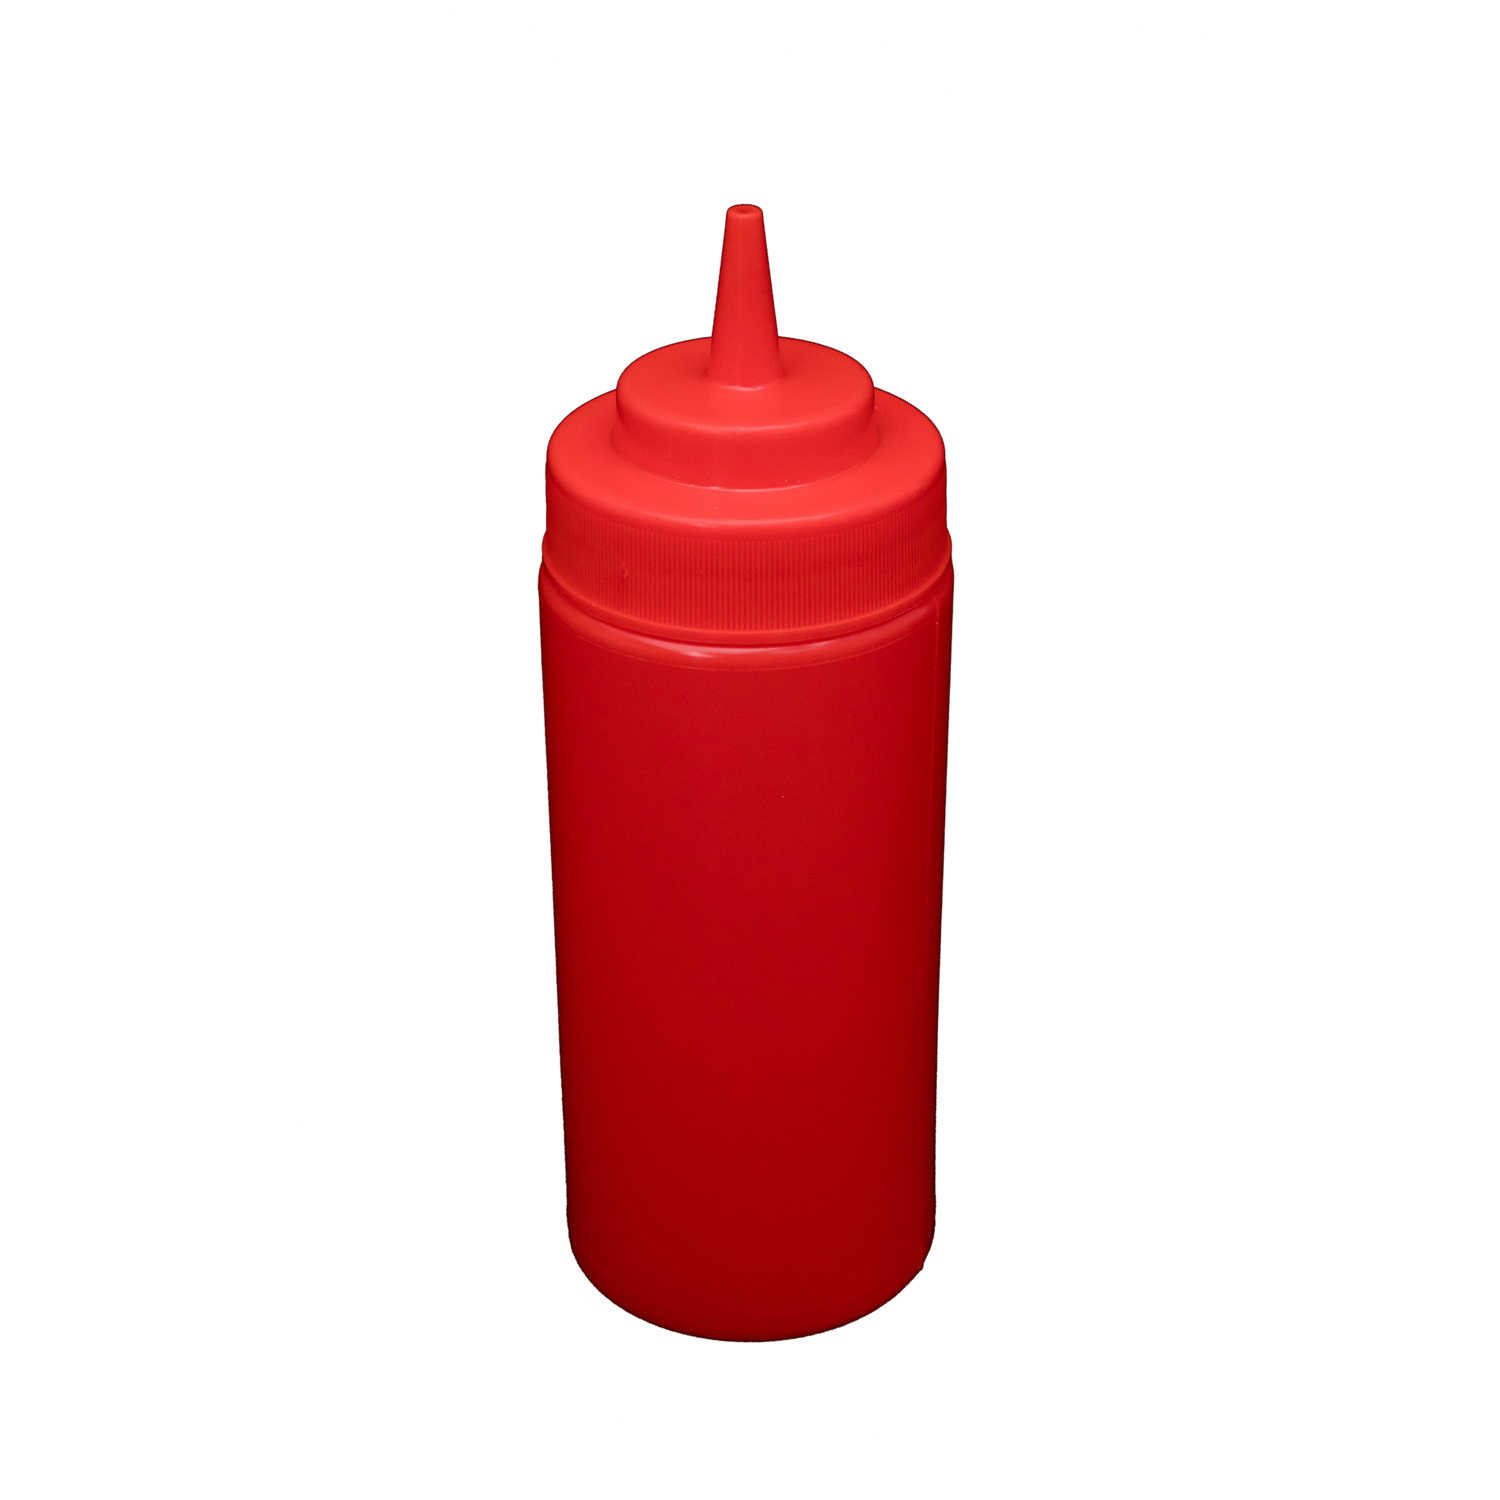 CAC China SQBT-W-16R Red Wide-Mouth Plastic Squeeze Bottle 16 oz.